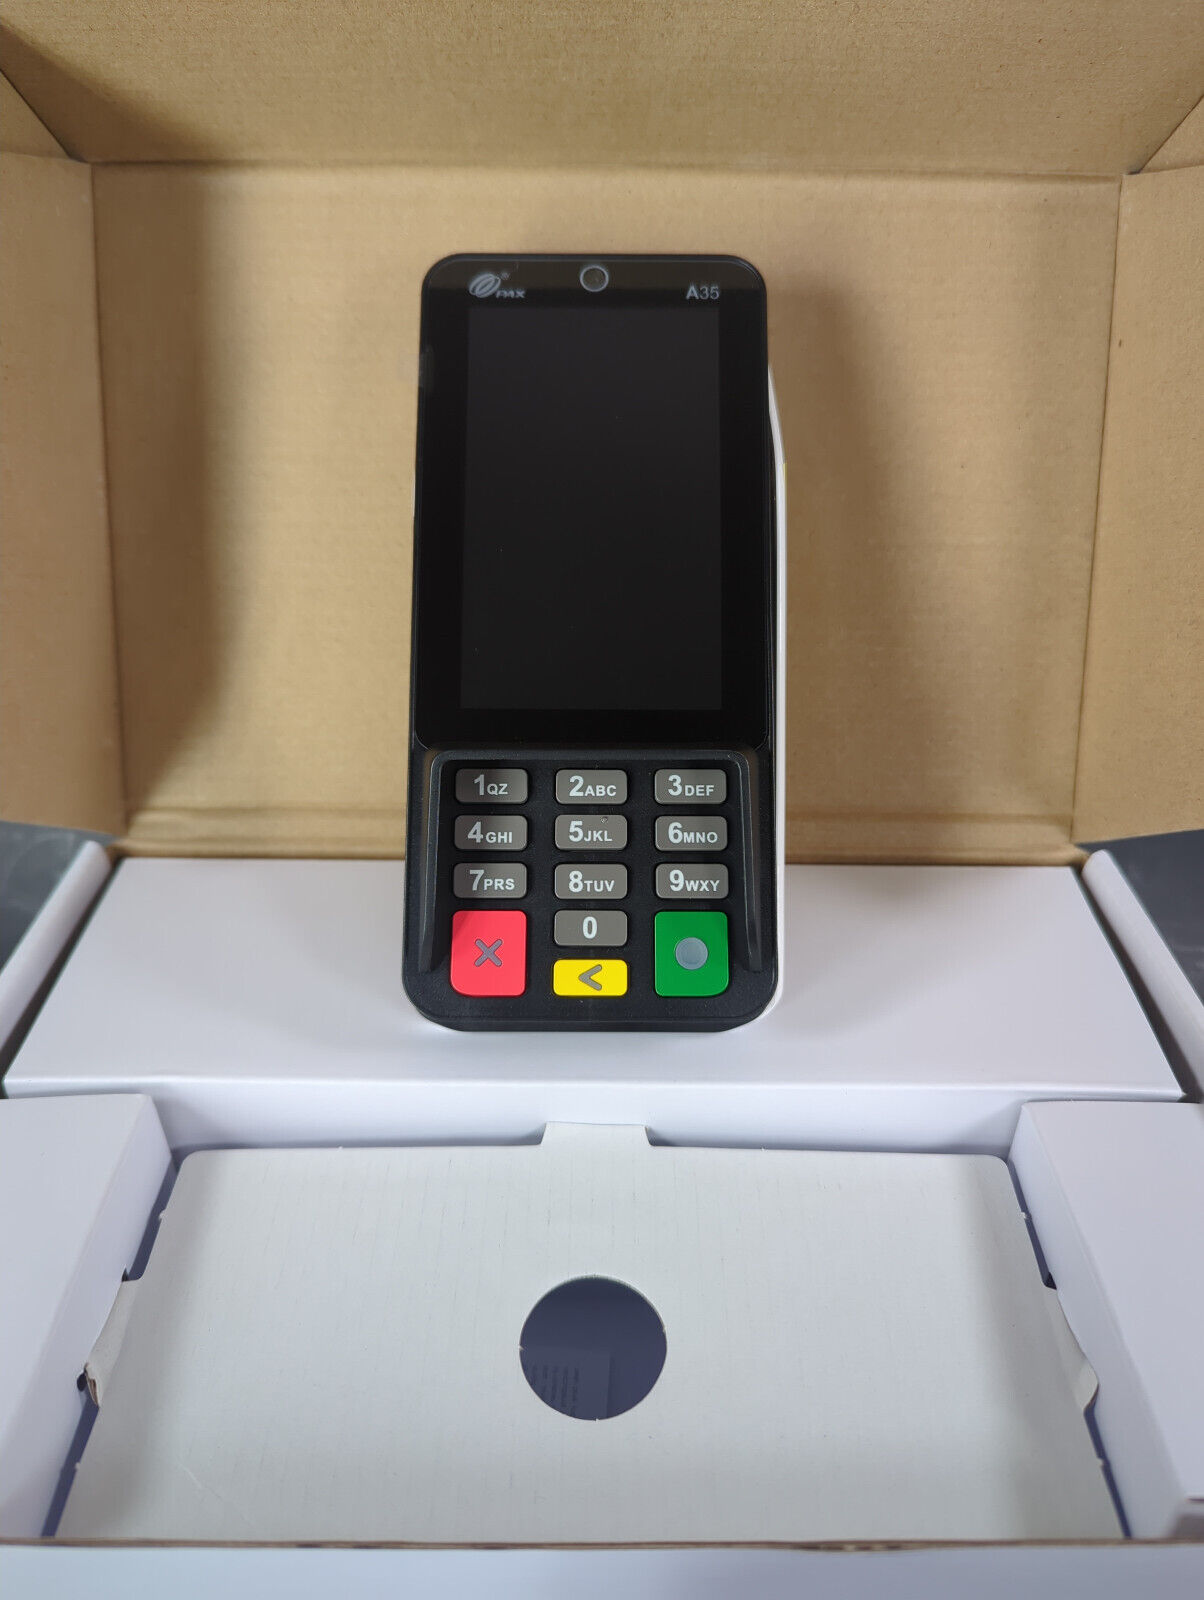 *New* *UNLOCKED* PAX A35 Android Smart POS Terminal